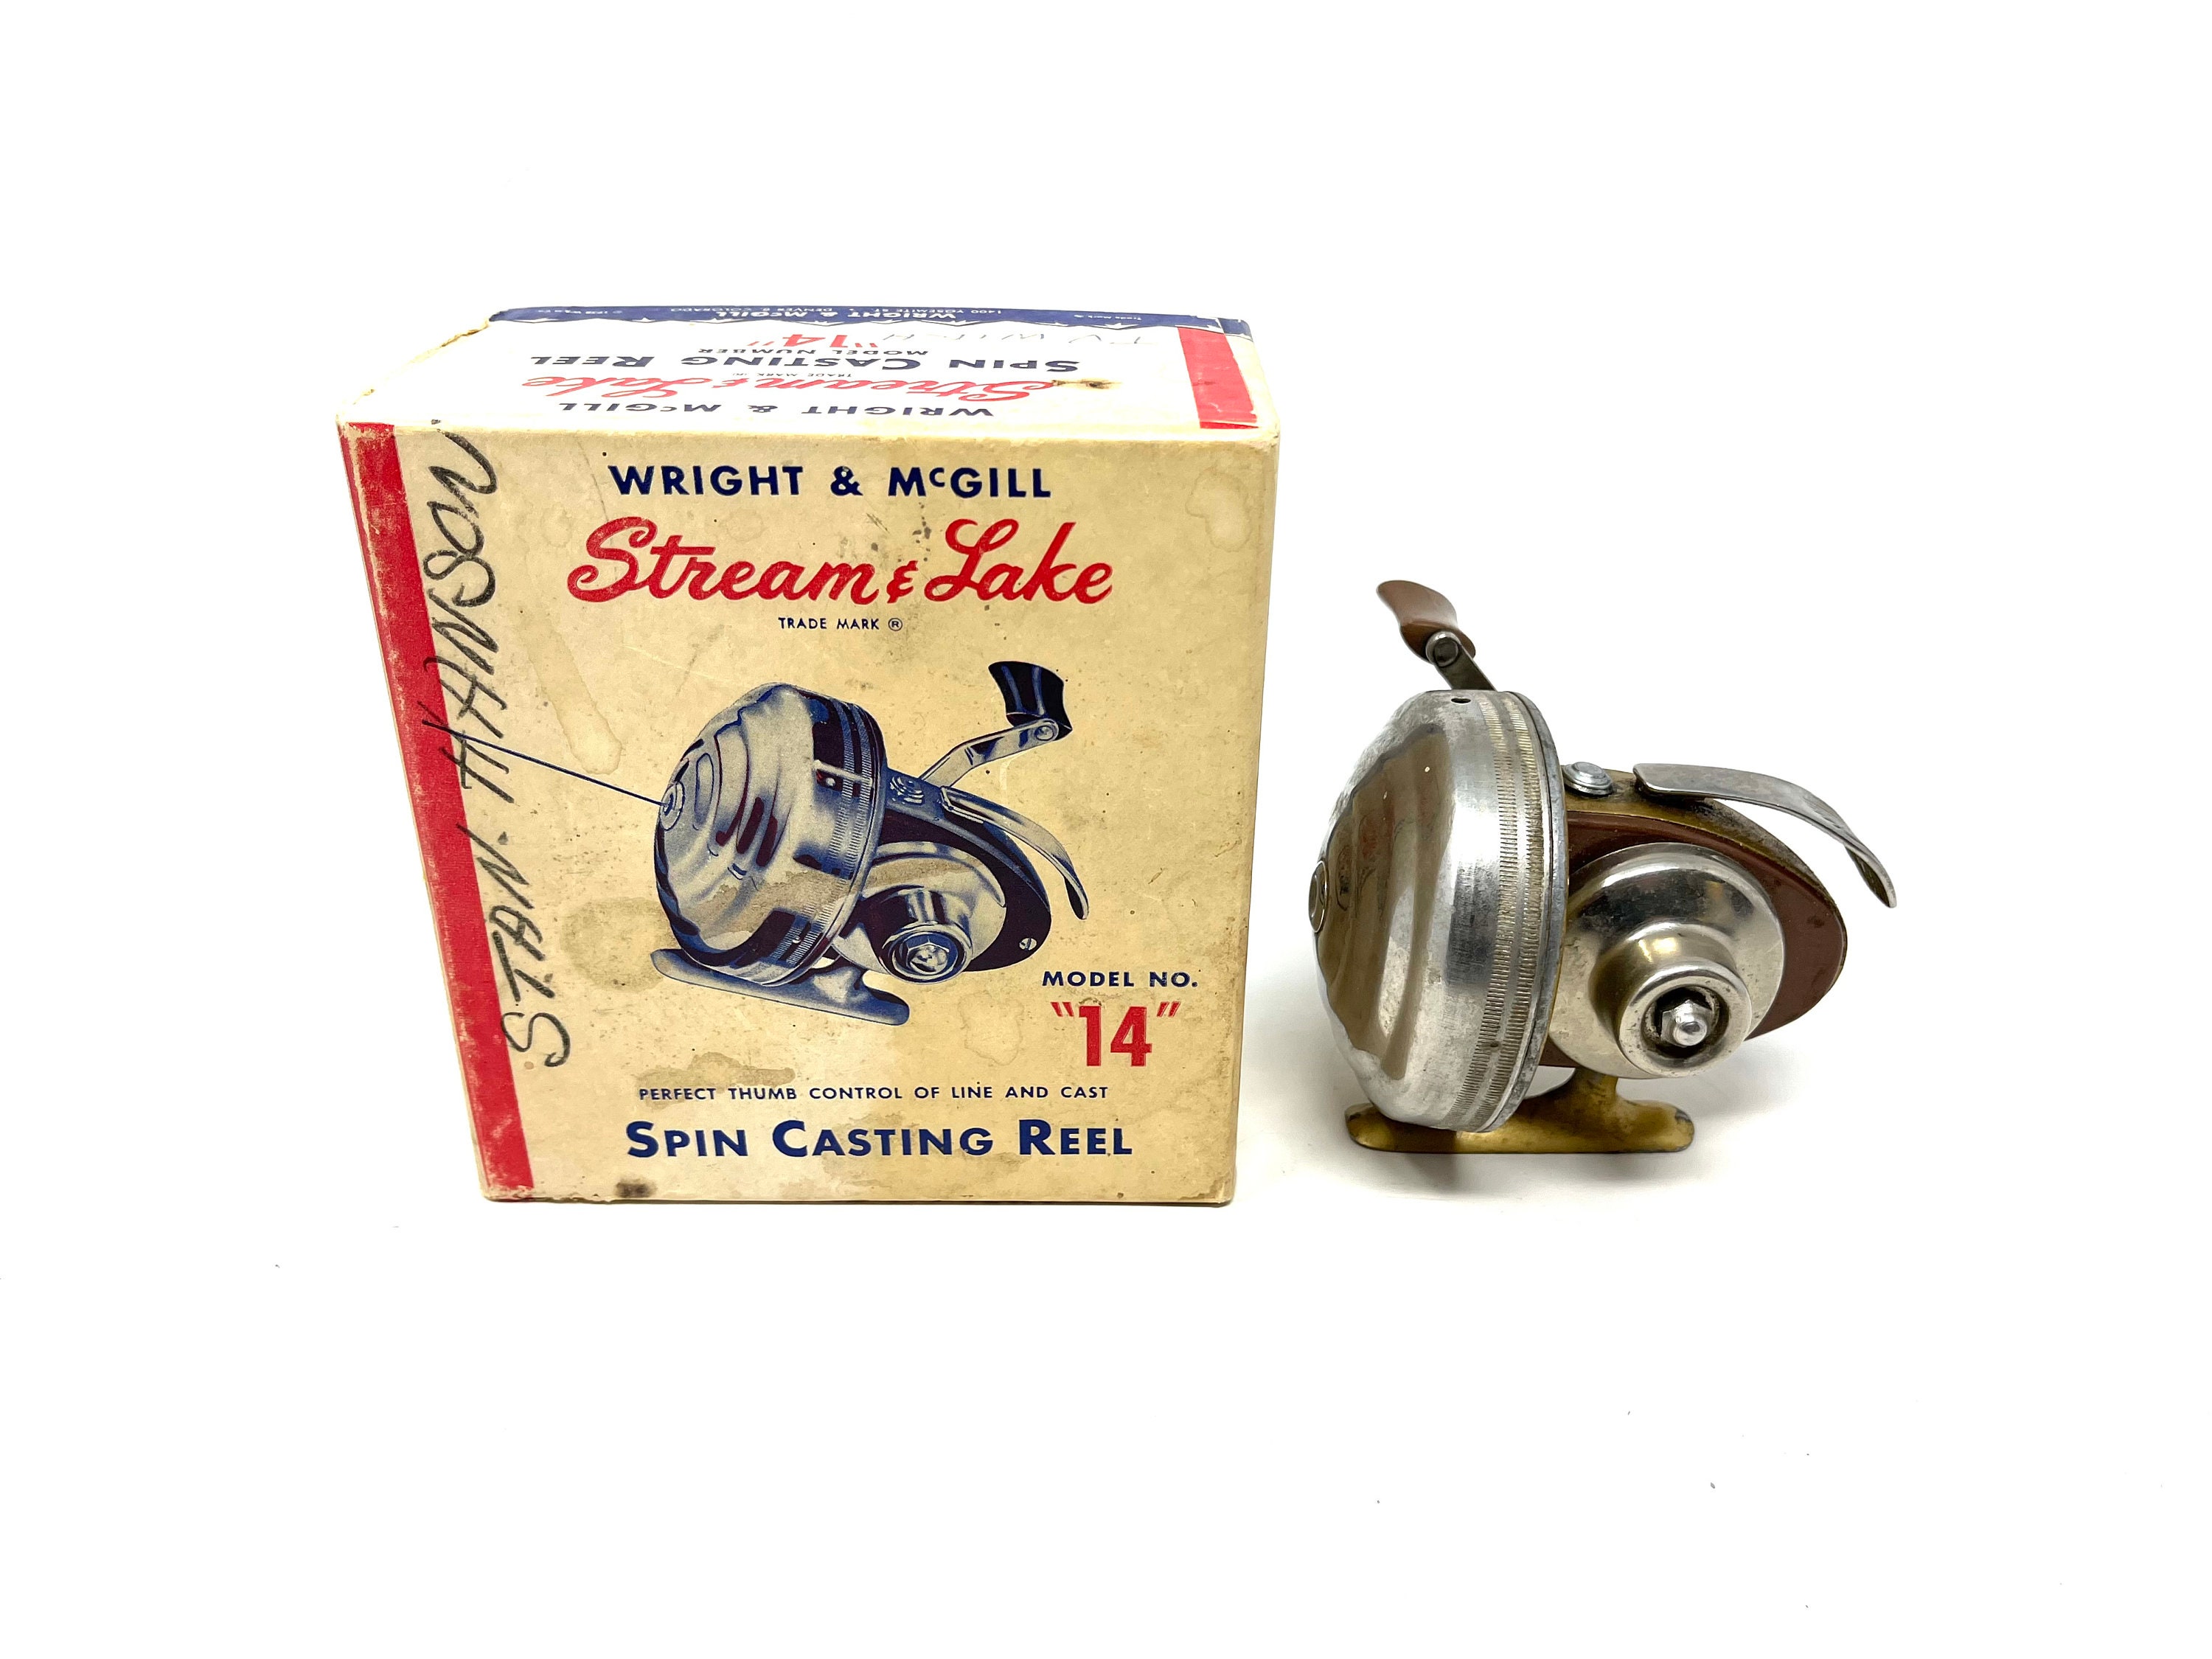 Vintage Wright and Mcgill Stream and Lake Model 14 Spin Casting Reel in  Original Box / Antique Spin Casting Reel Stream and Lake Model 14 